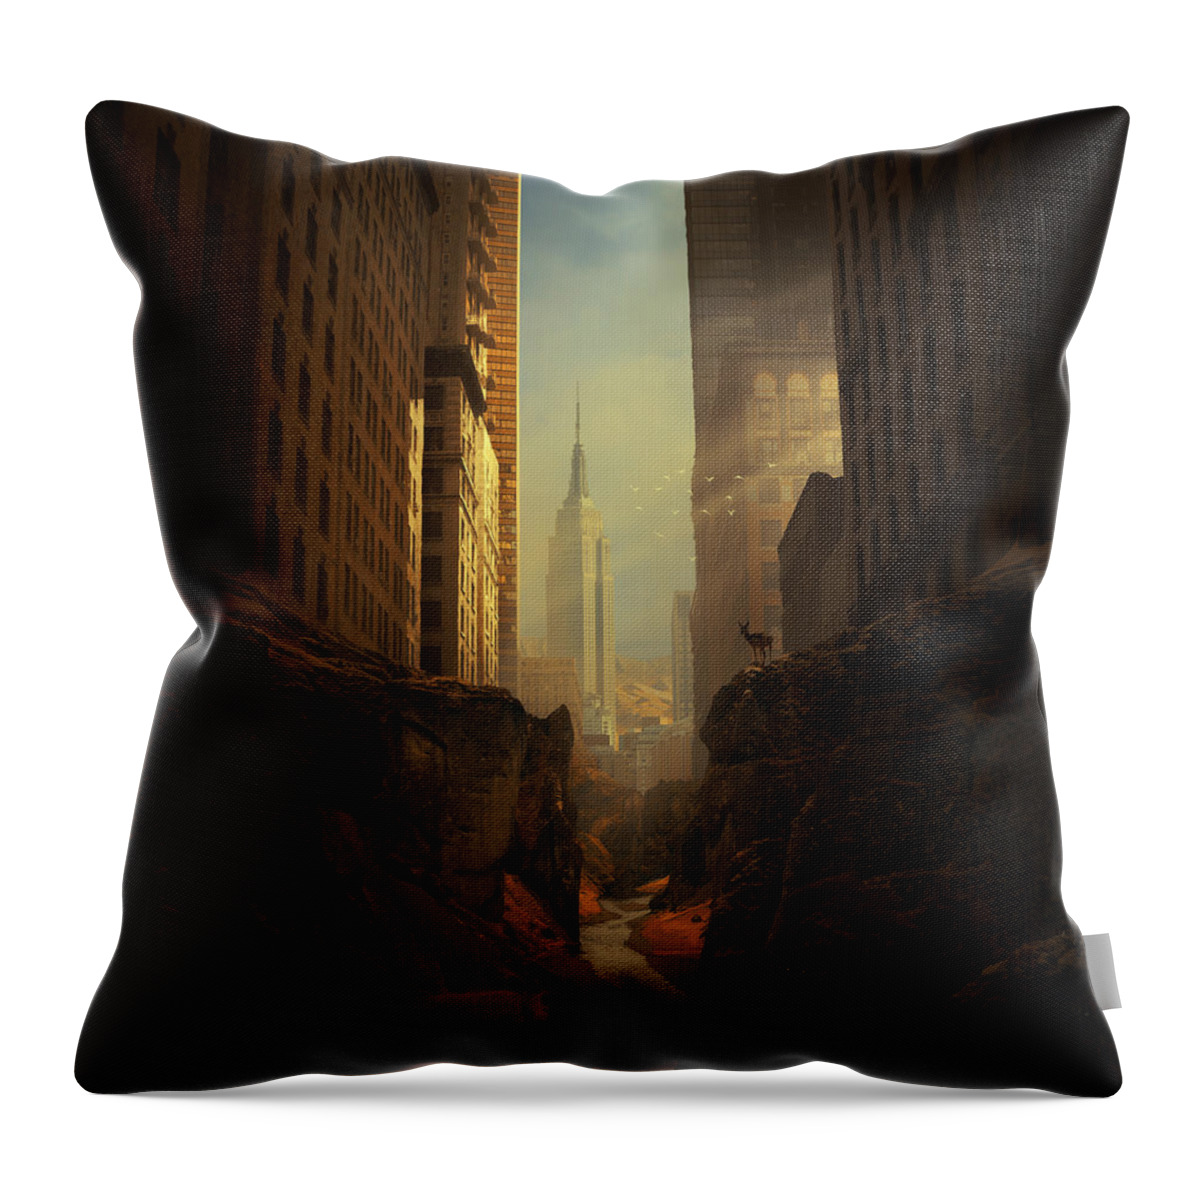 City Ruins Apocalypse Buildings Sun Animal Sunbeams Abandoned Ny Landscape Photomontage Rocks Loneliness Creek Walls Birds Sciencefiction Fantasy Newyork Warm Shadows Nature Architecture Photomontage Photomanipulation Throw Pillow featuring the photograph 2146 by Michal Karcz